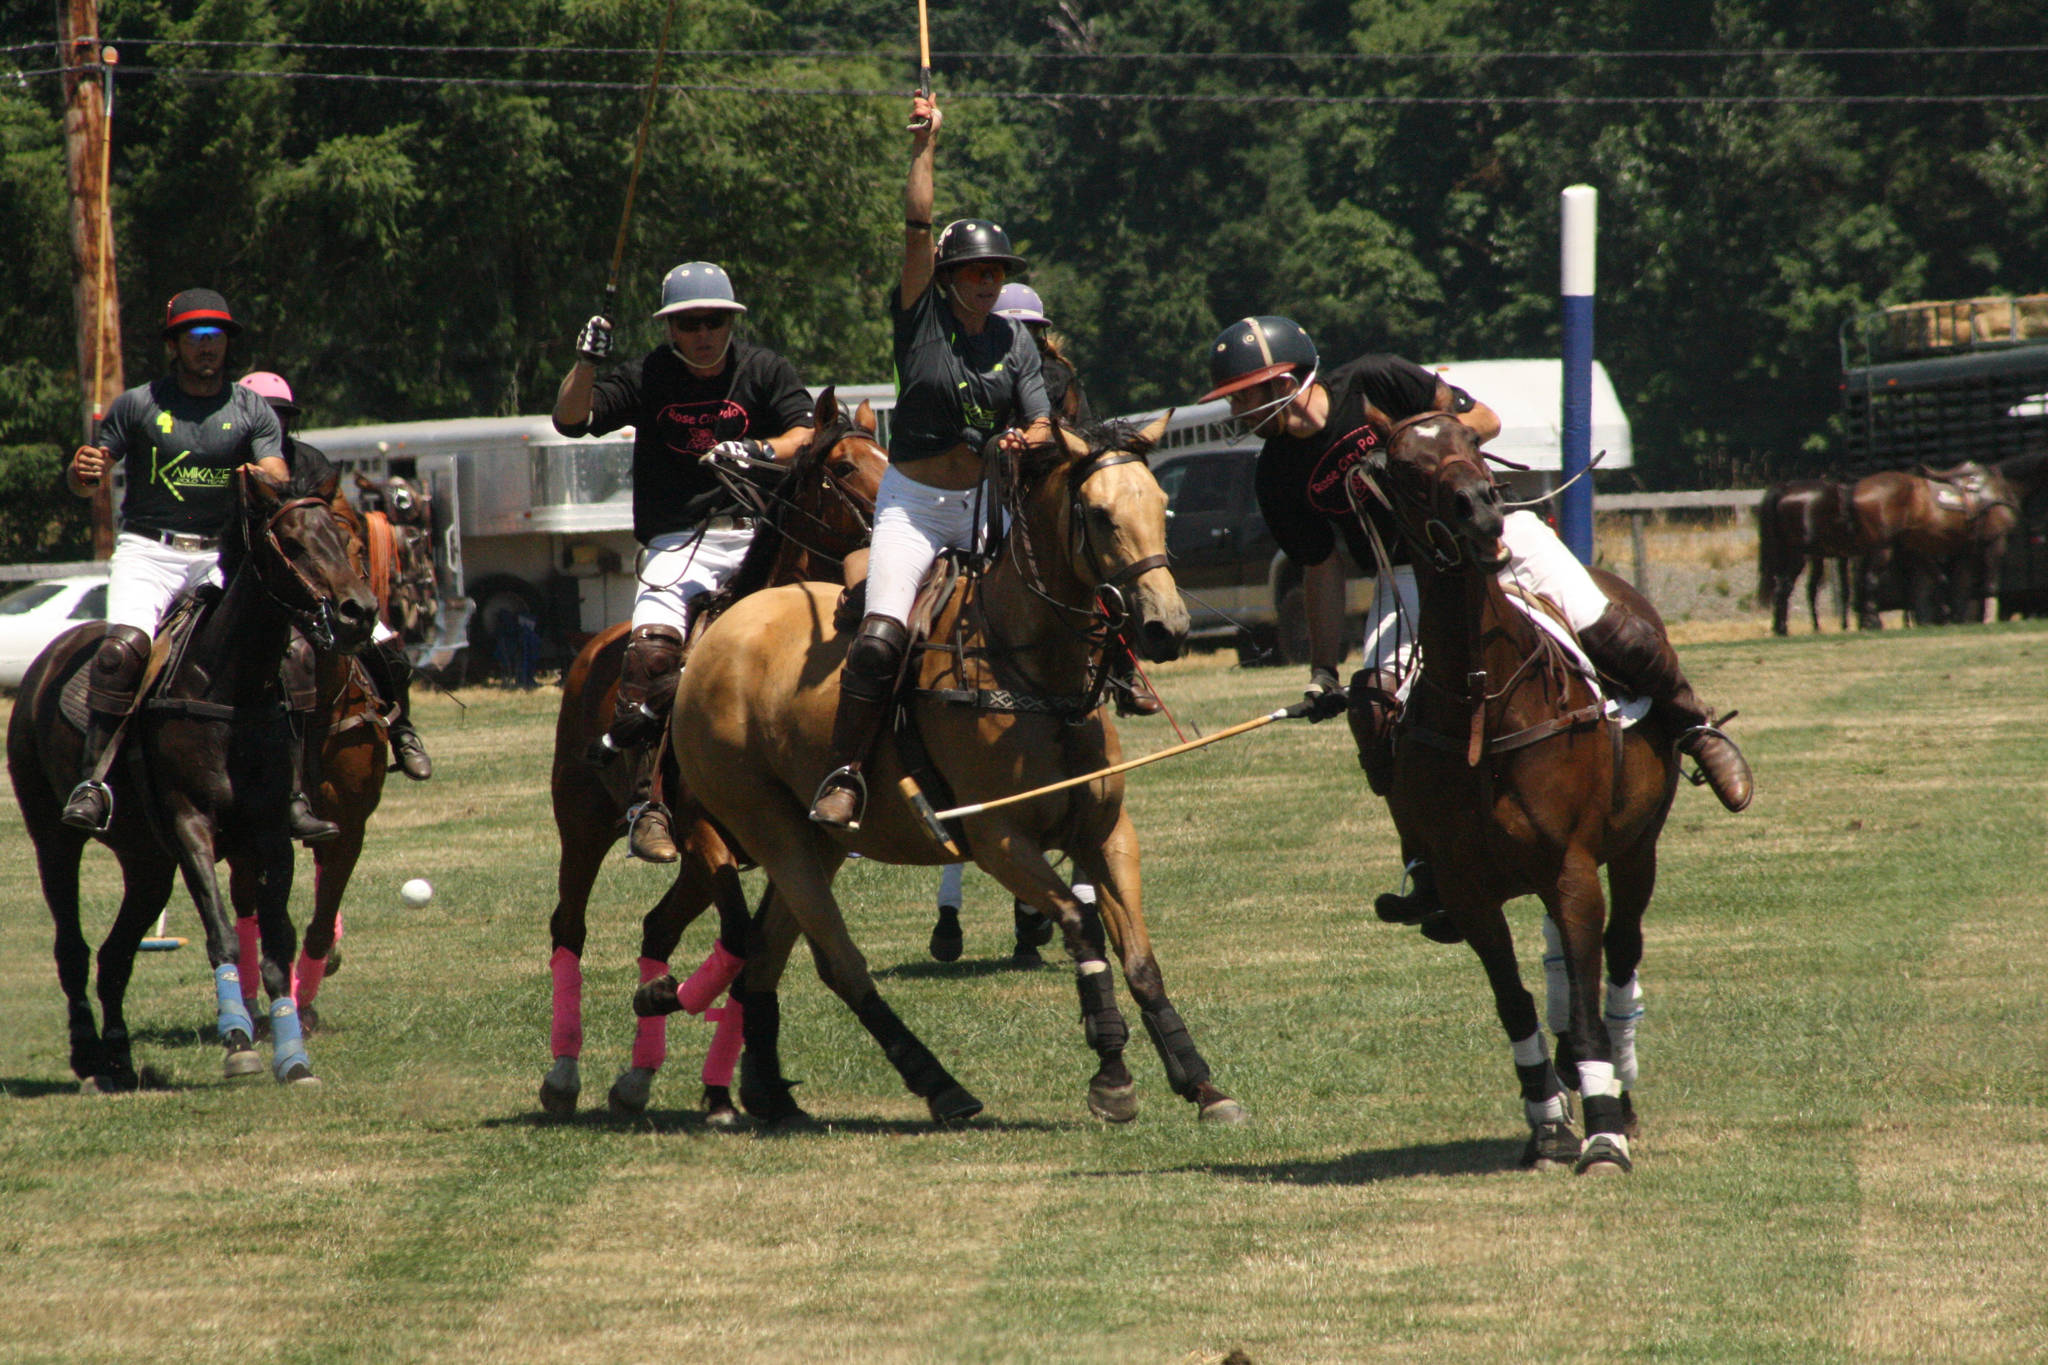 Pacific Northwest Governor’s Cup polo tournament|Gallery